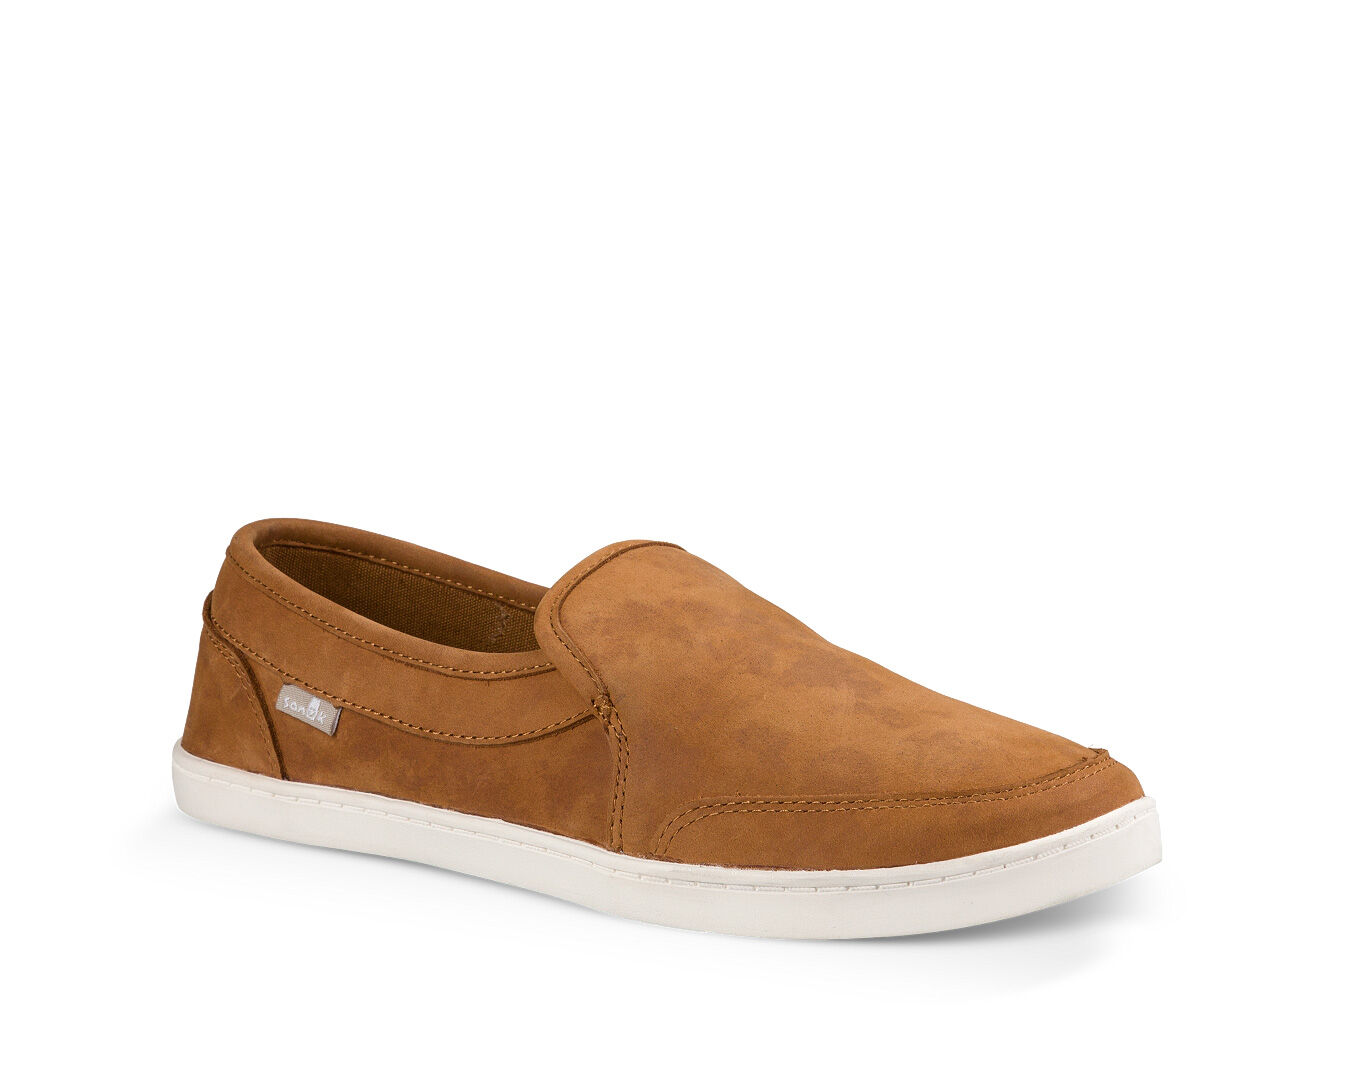 Pair O Dice Leather Slip-on Sneakers 